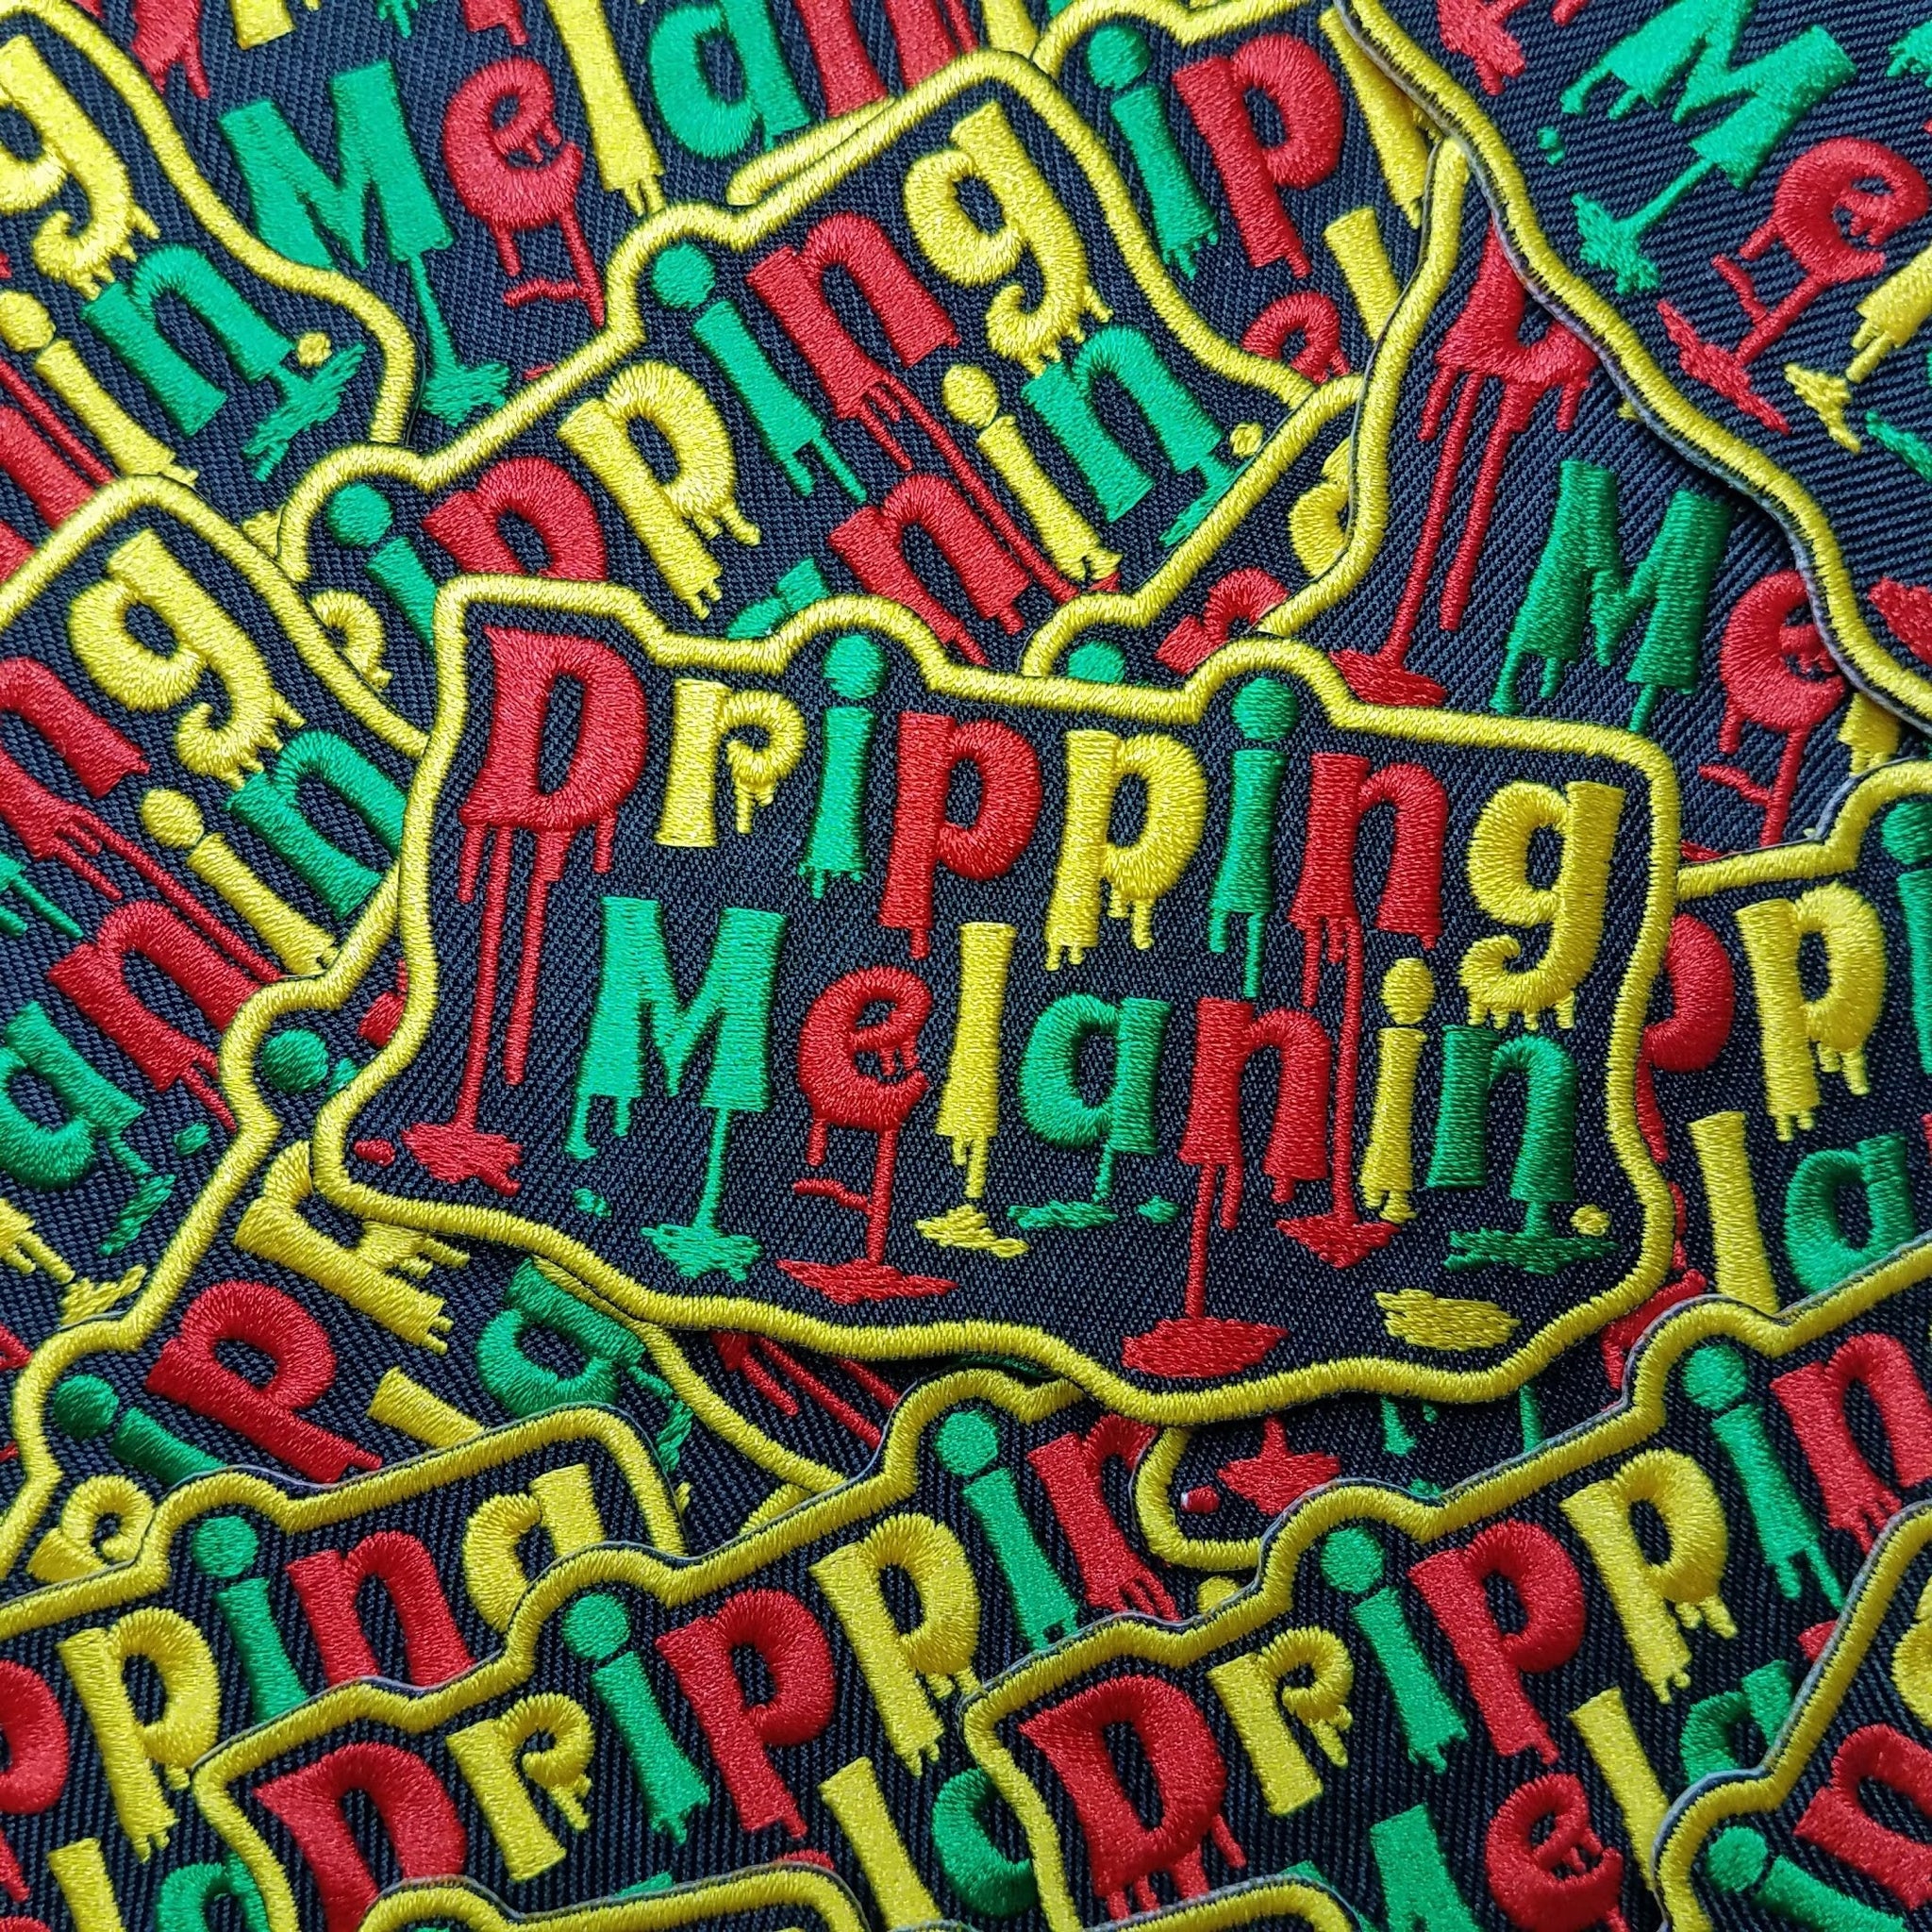 Dripping, Fun, "Dripping Melanin" Iron-On Embroidered Afrocentric Patch; Motivational Patch, Patch for denim jackets, NEW with YELLOW Border